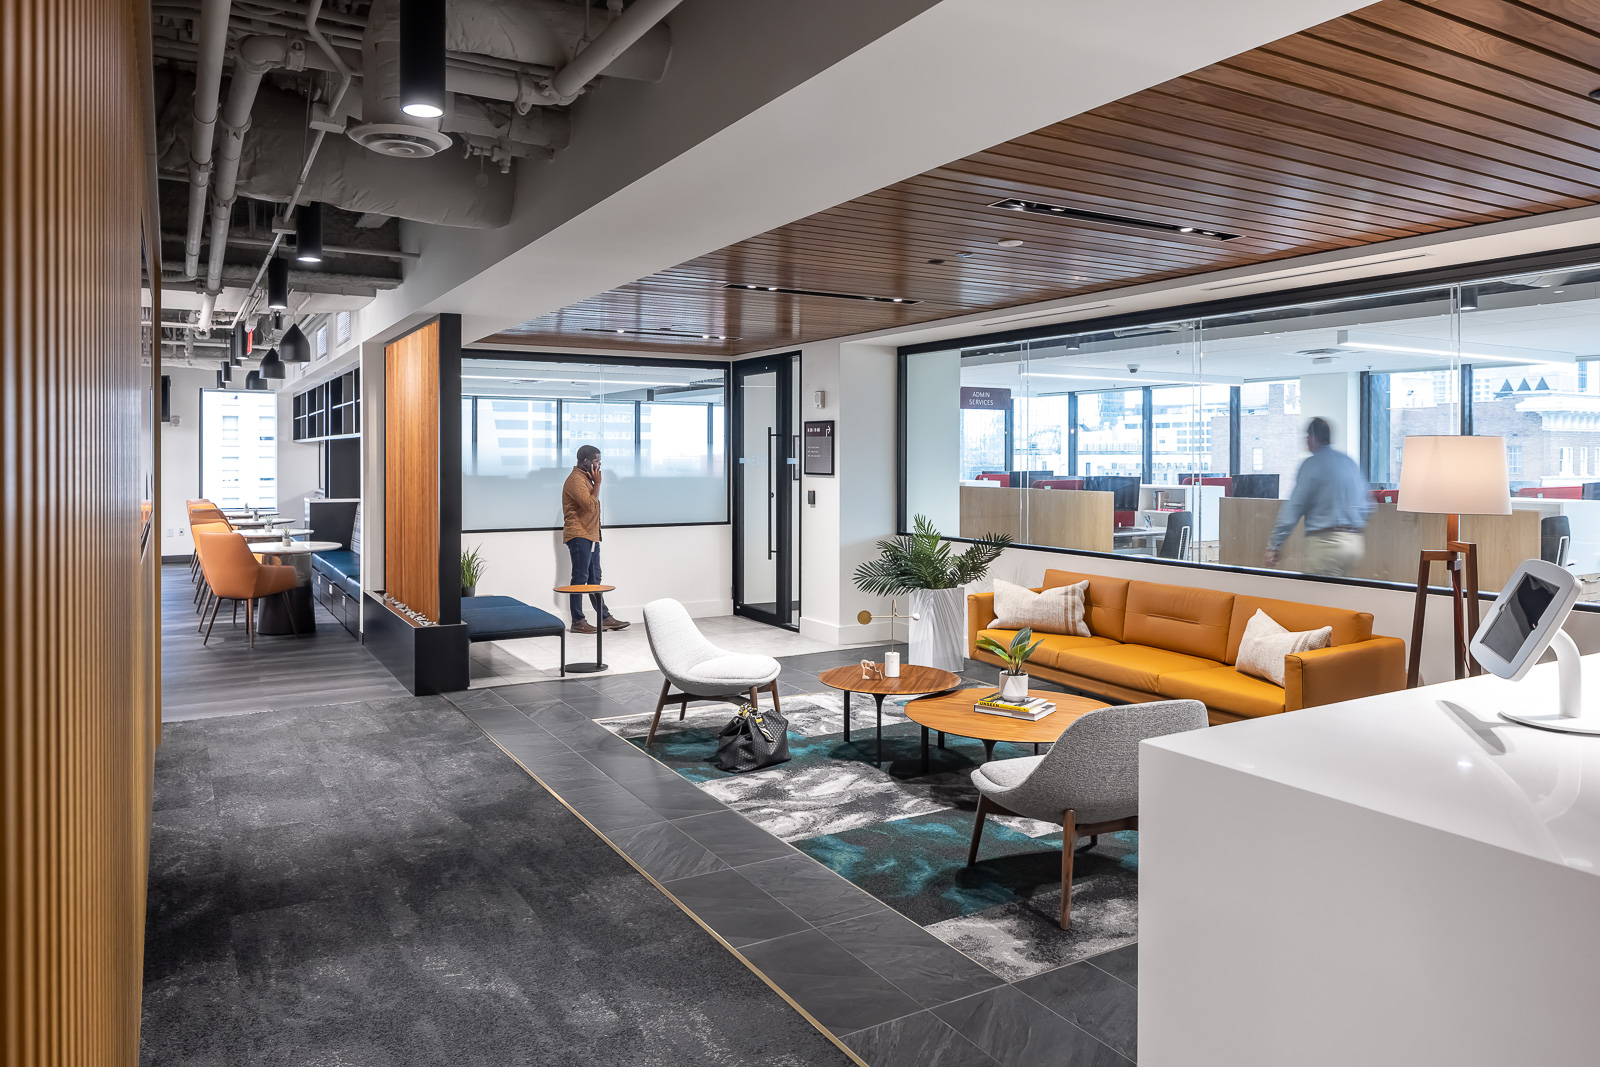 officeinsight: An expansion for Boston Consulting Group